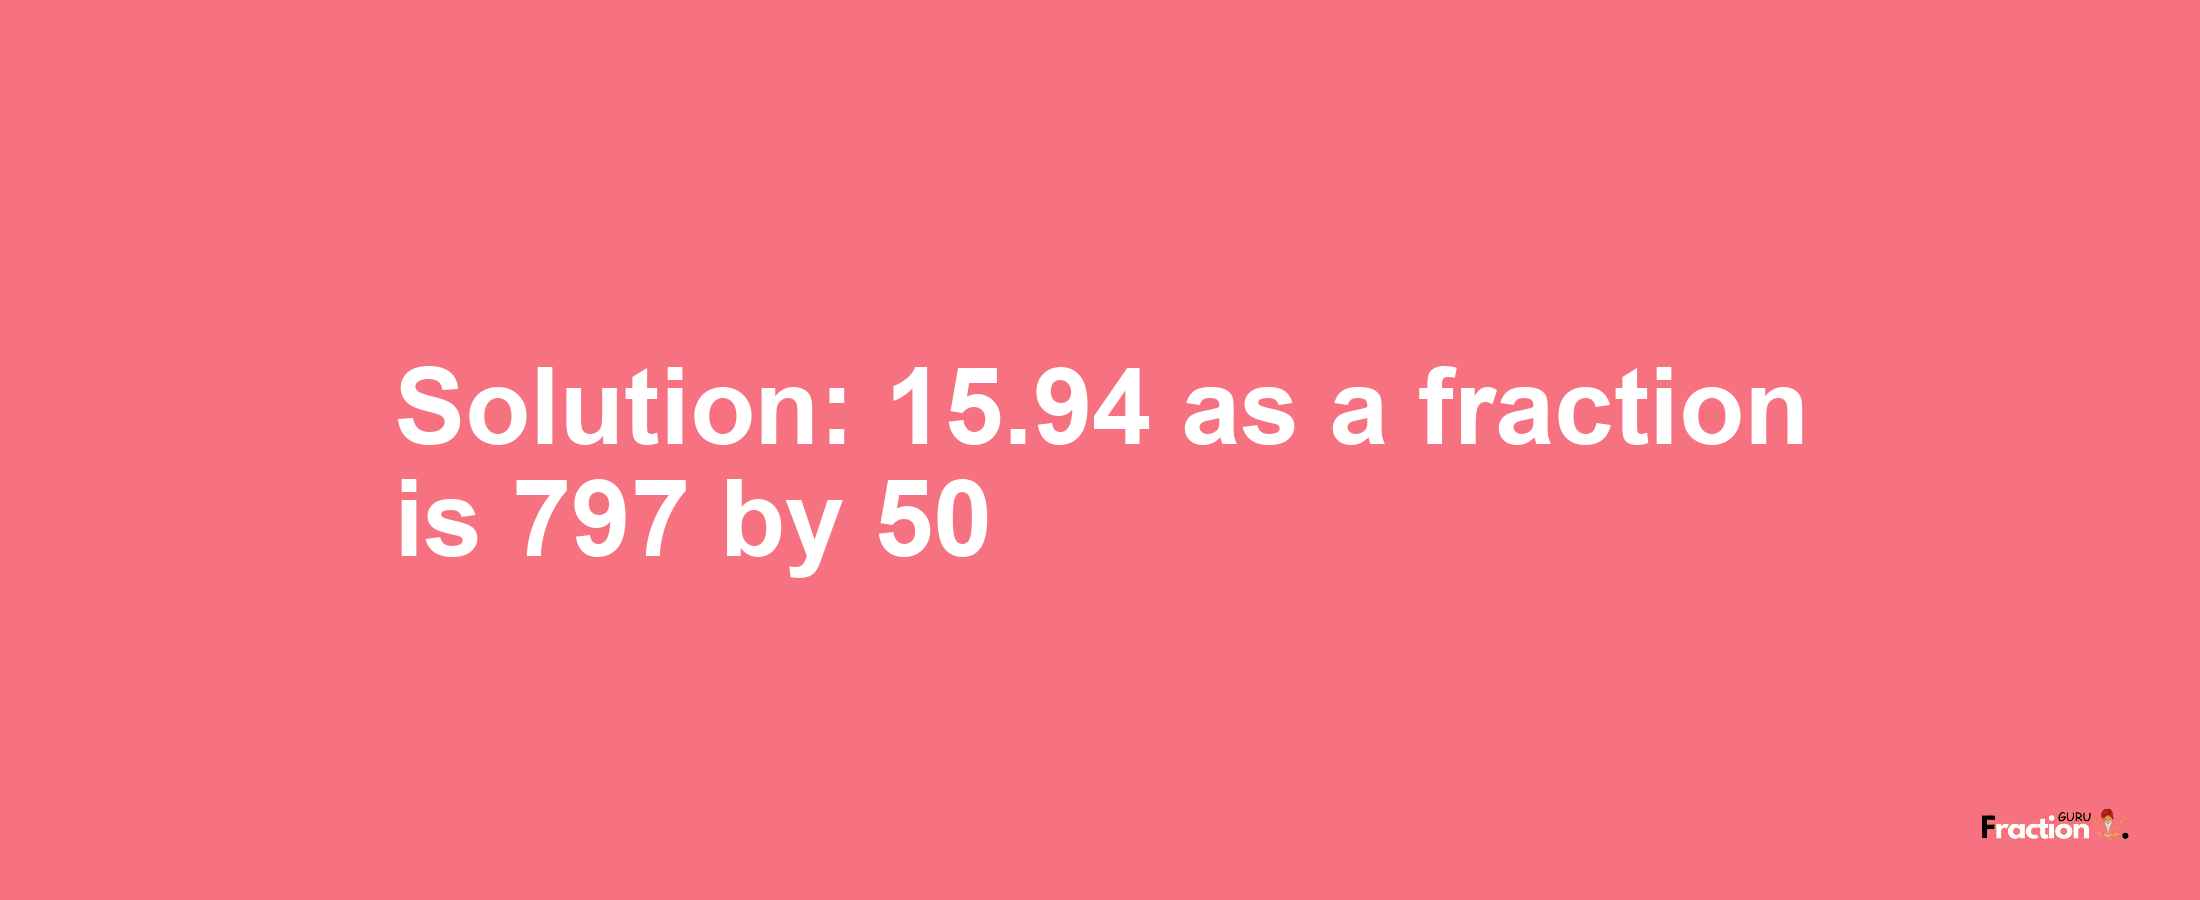 Solution:15.94 as a fraction is 797/50